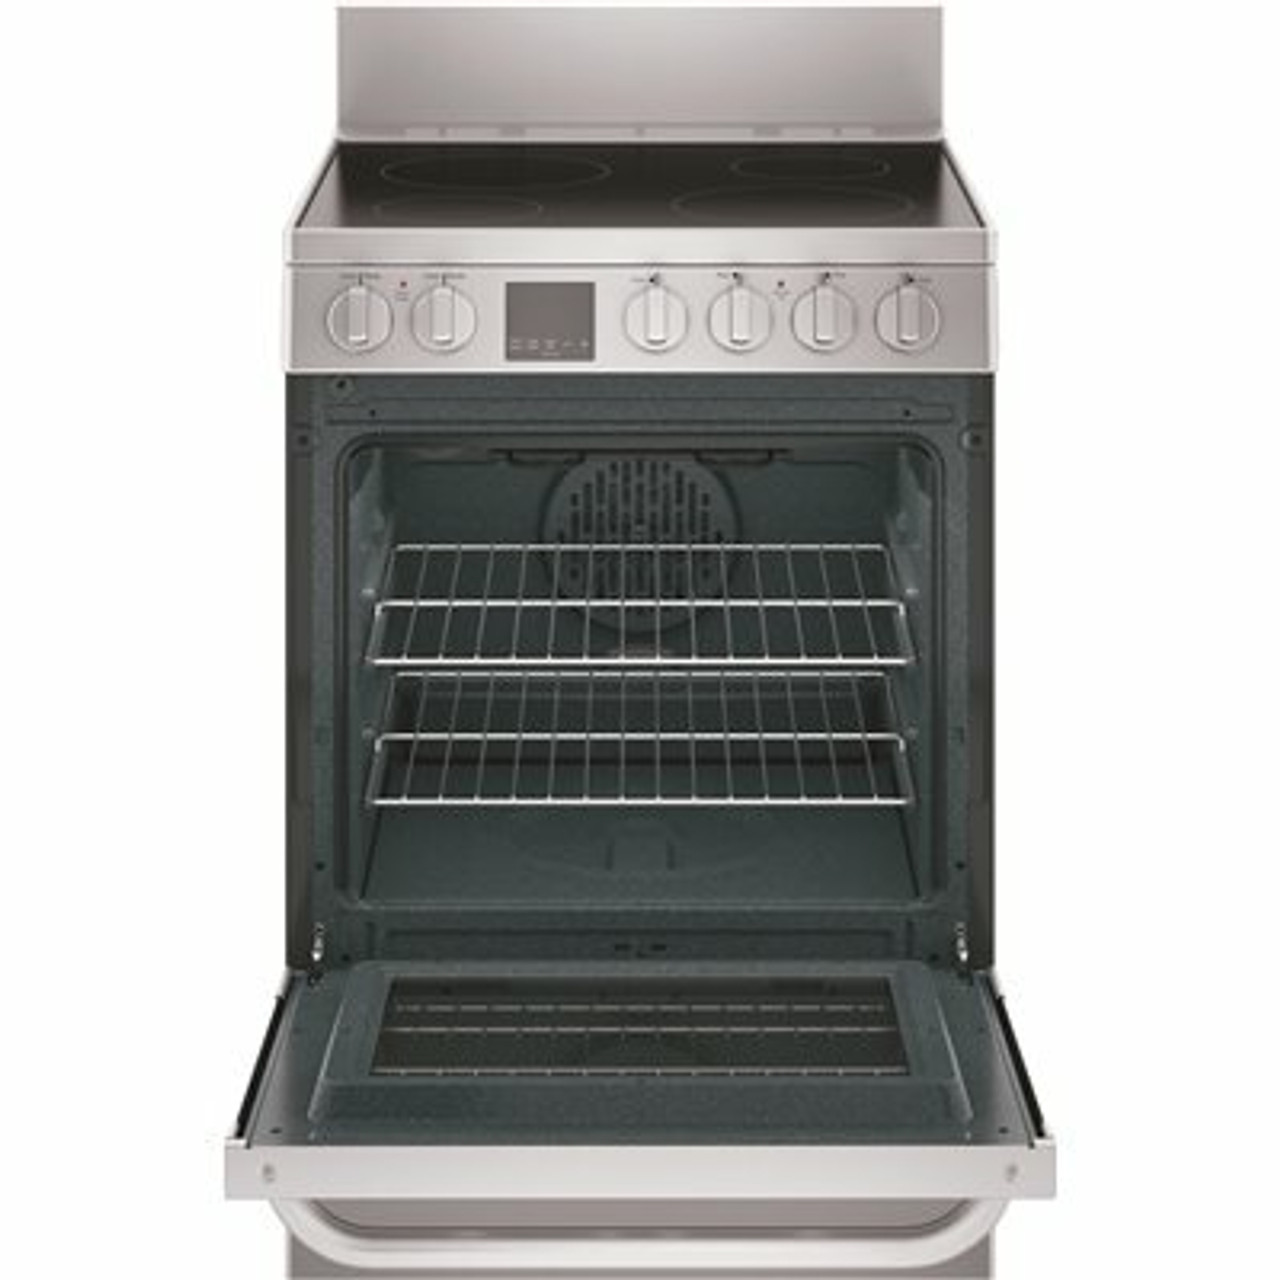 Haier 24 In. 2.9 Cu. Ft. Gas Range With Convection Oven In Stainless Steel